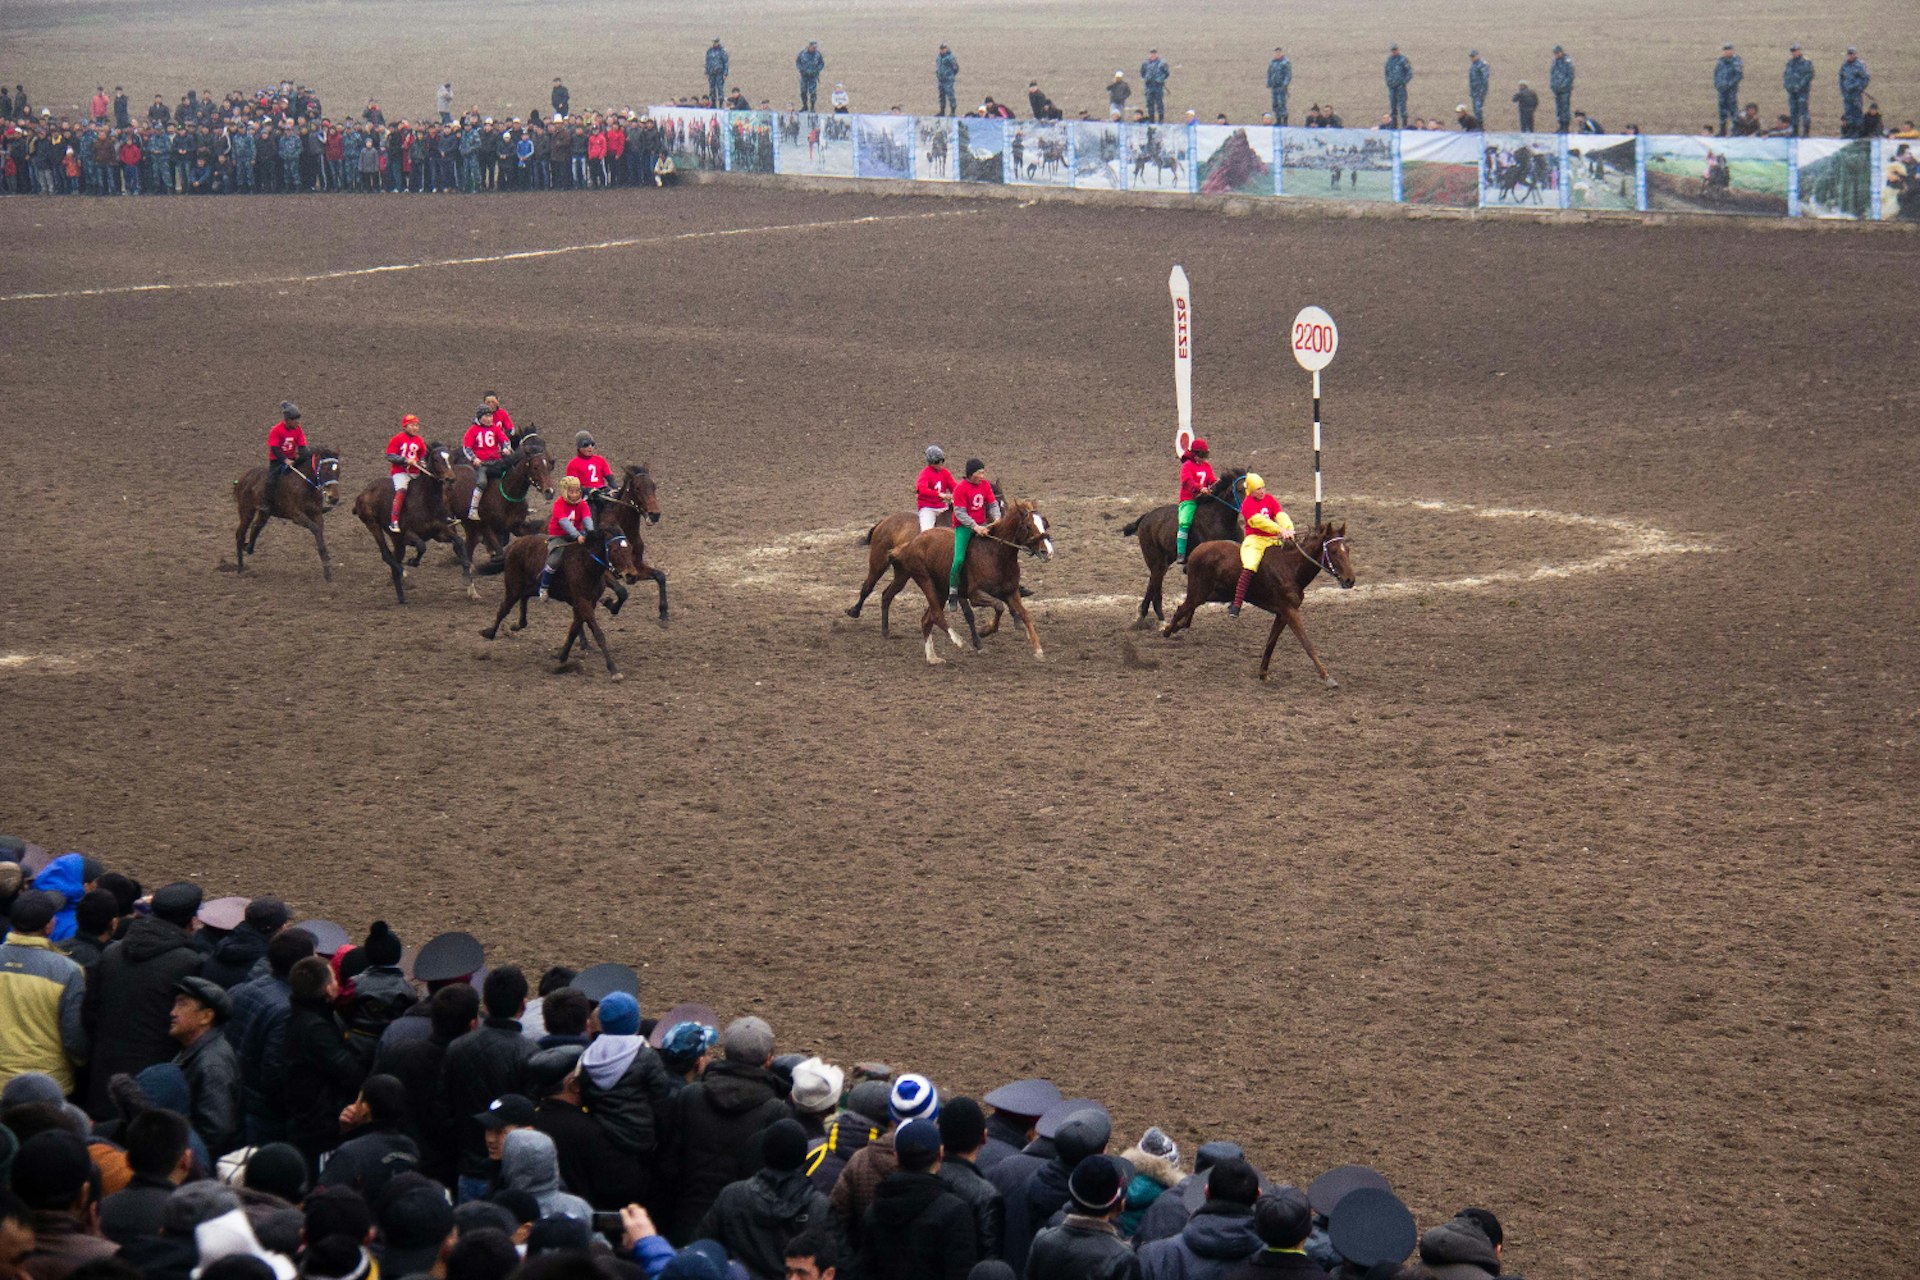 Kok-boru and other equestrian sports are popular throughout the 'Stans during Nowruz © Stephen Lioy / Lonely Planet